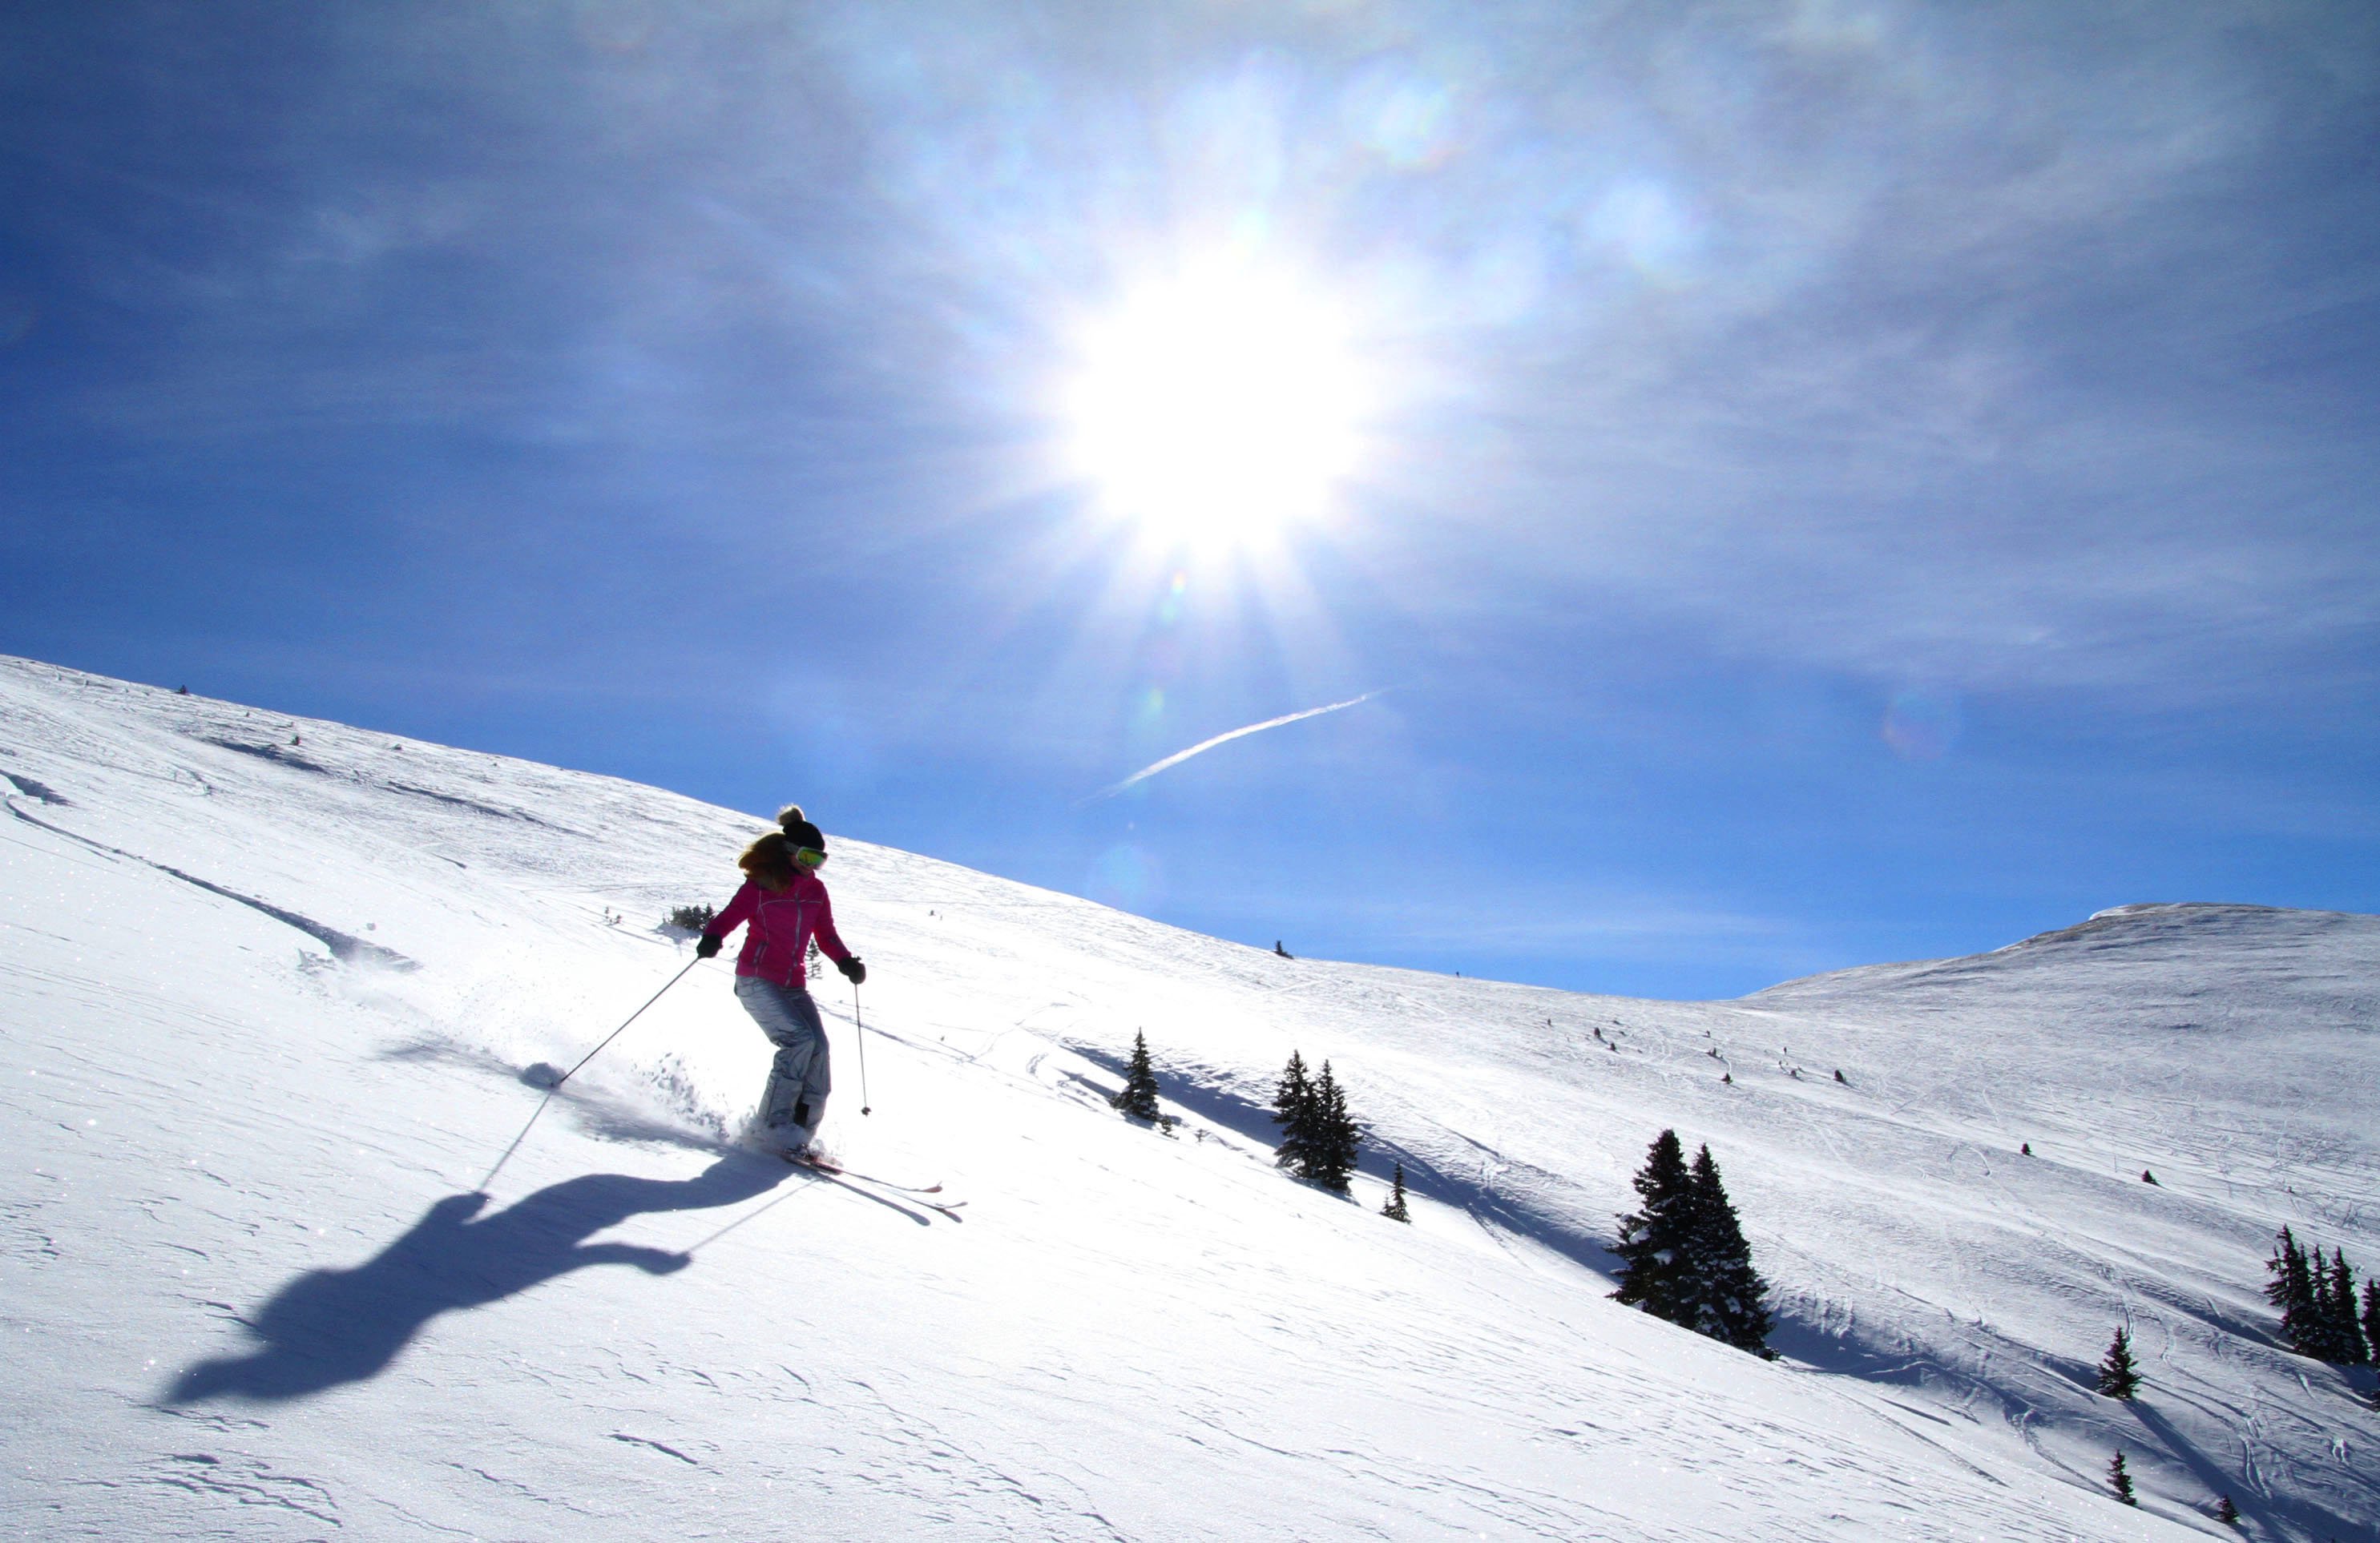 All Inclusive Ski Vacation Packages, Best Ski Resort Deals